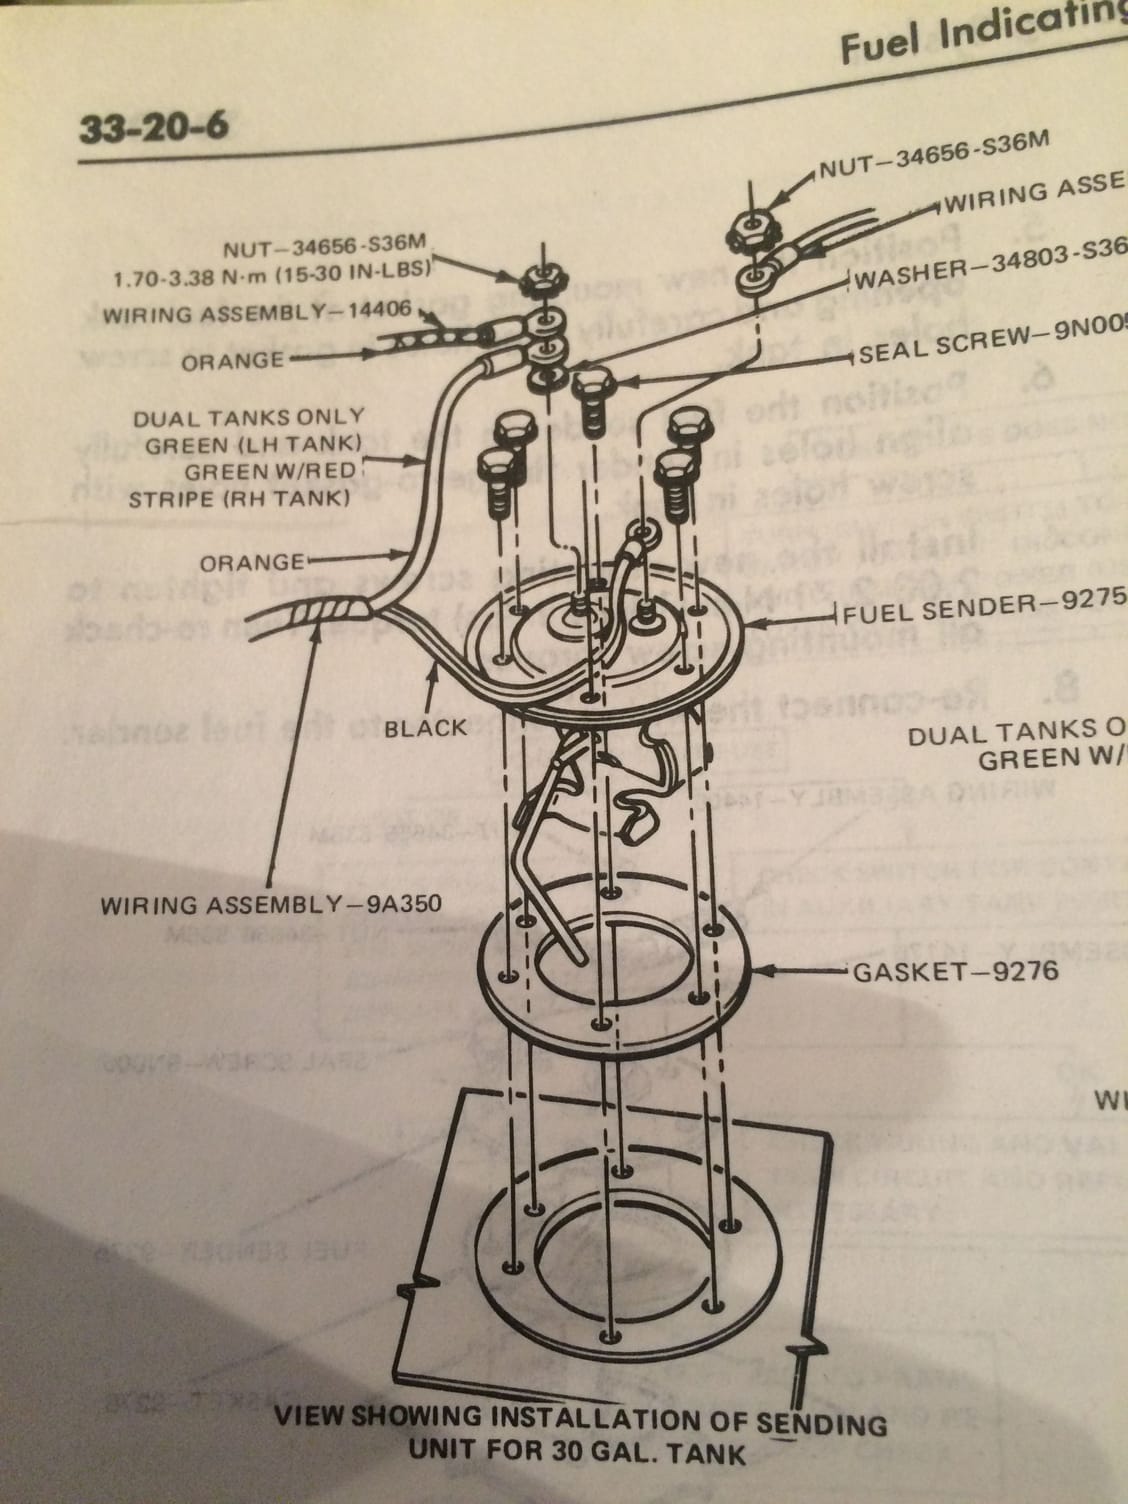 1986 c800 wiring diagram - Ford Truck Enthusiasts Forums